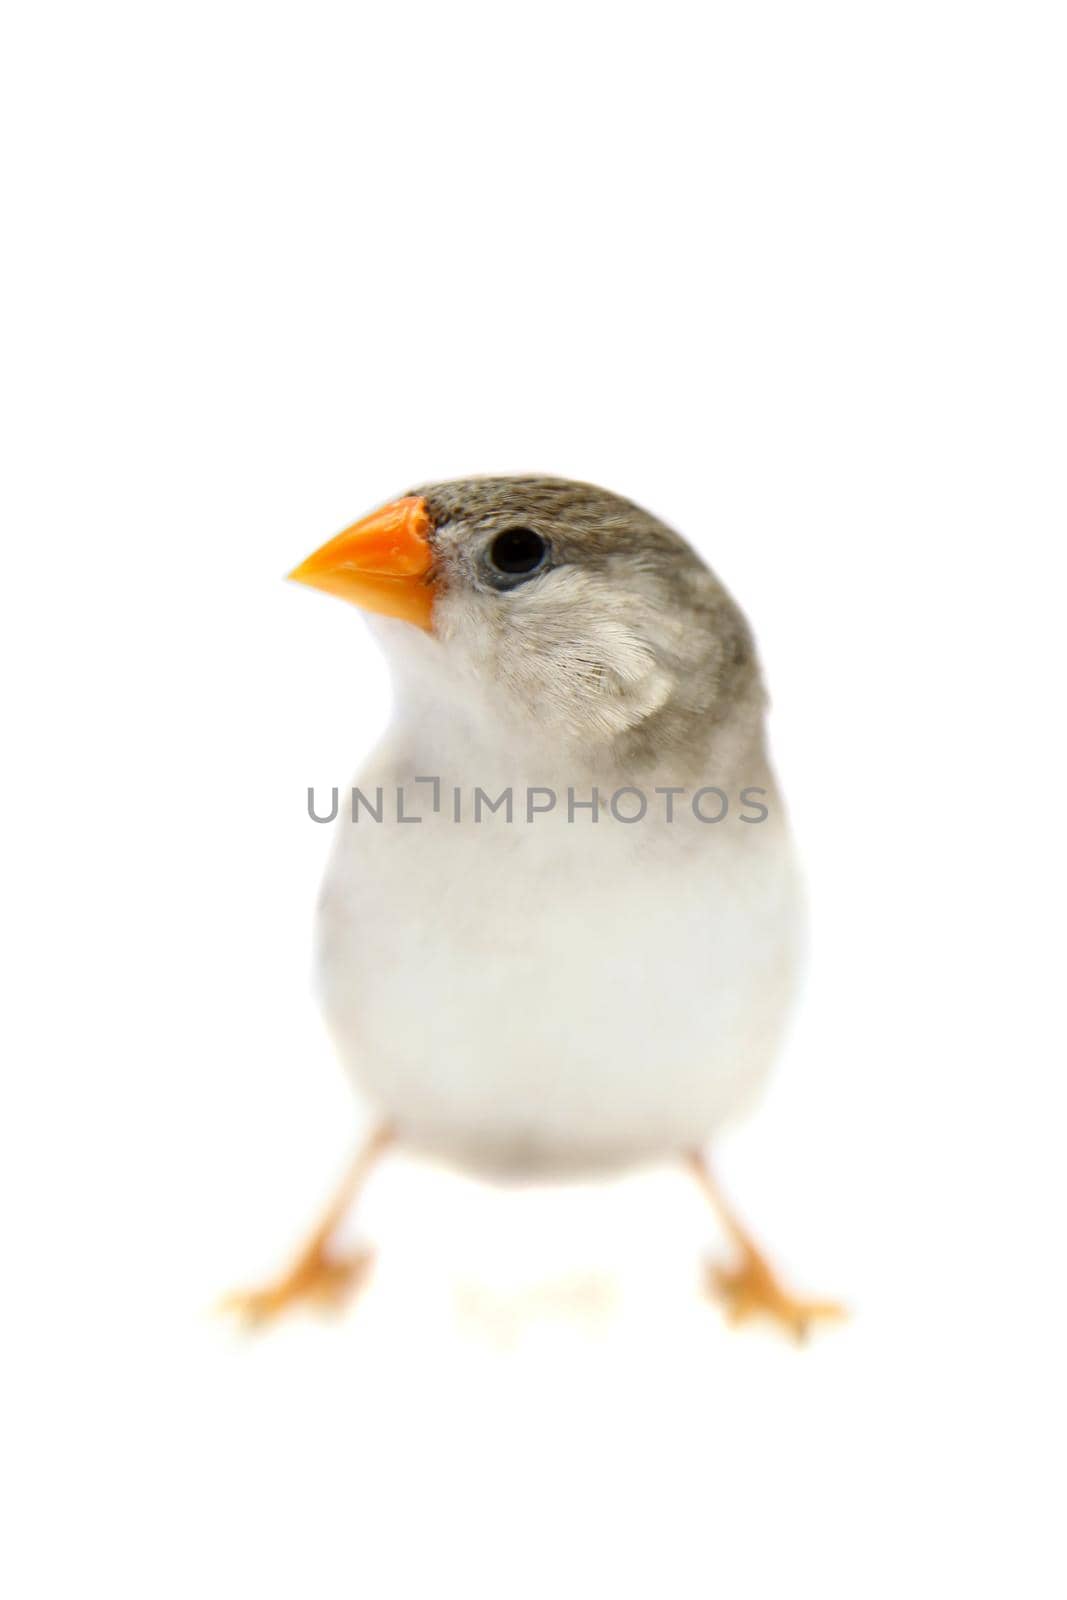 Zebra Finch in front of a white background